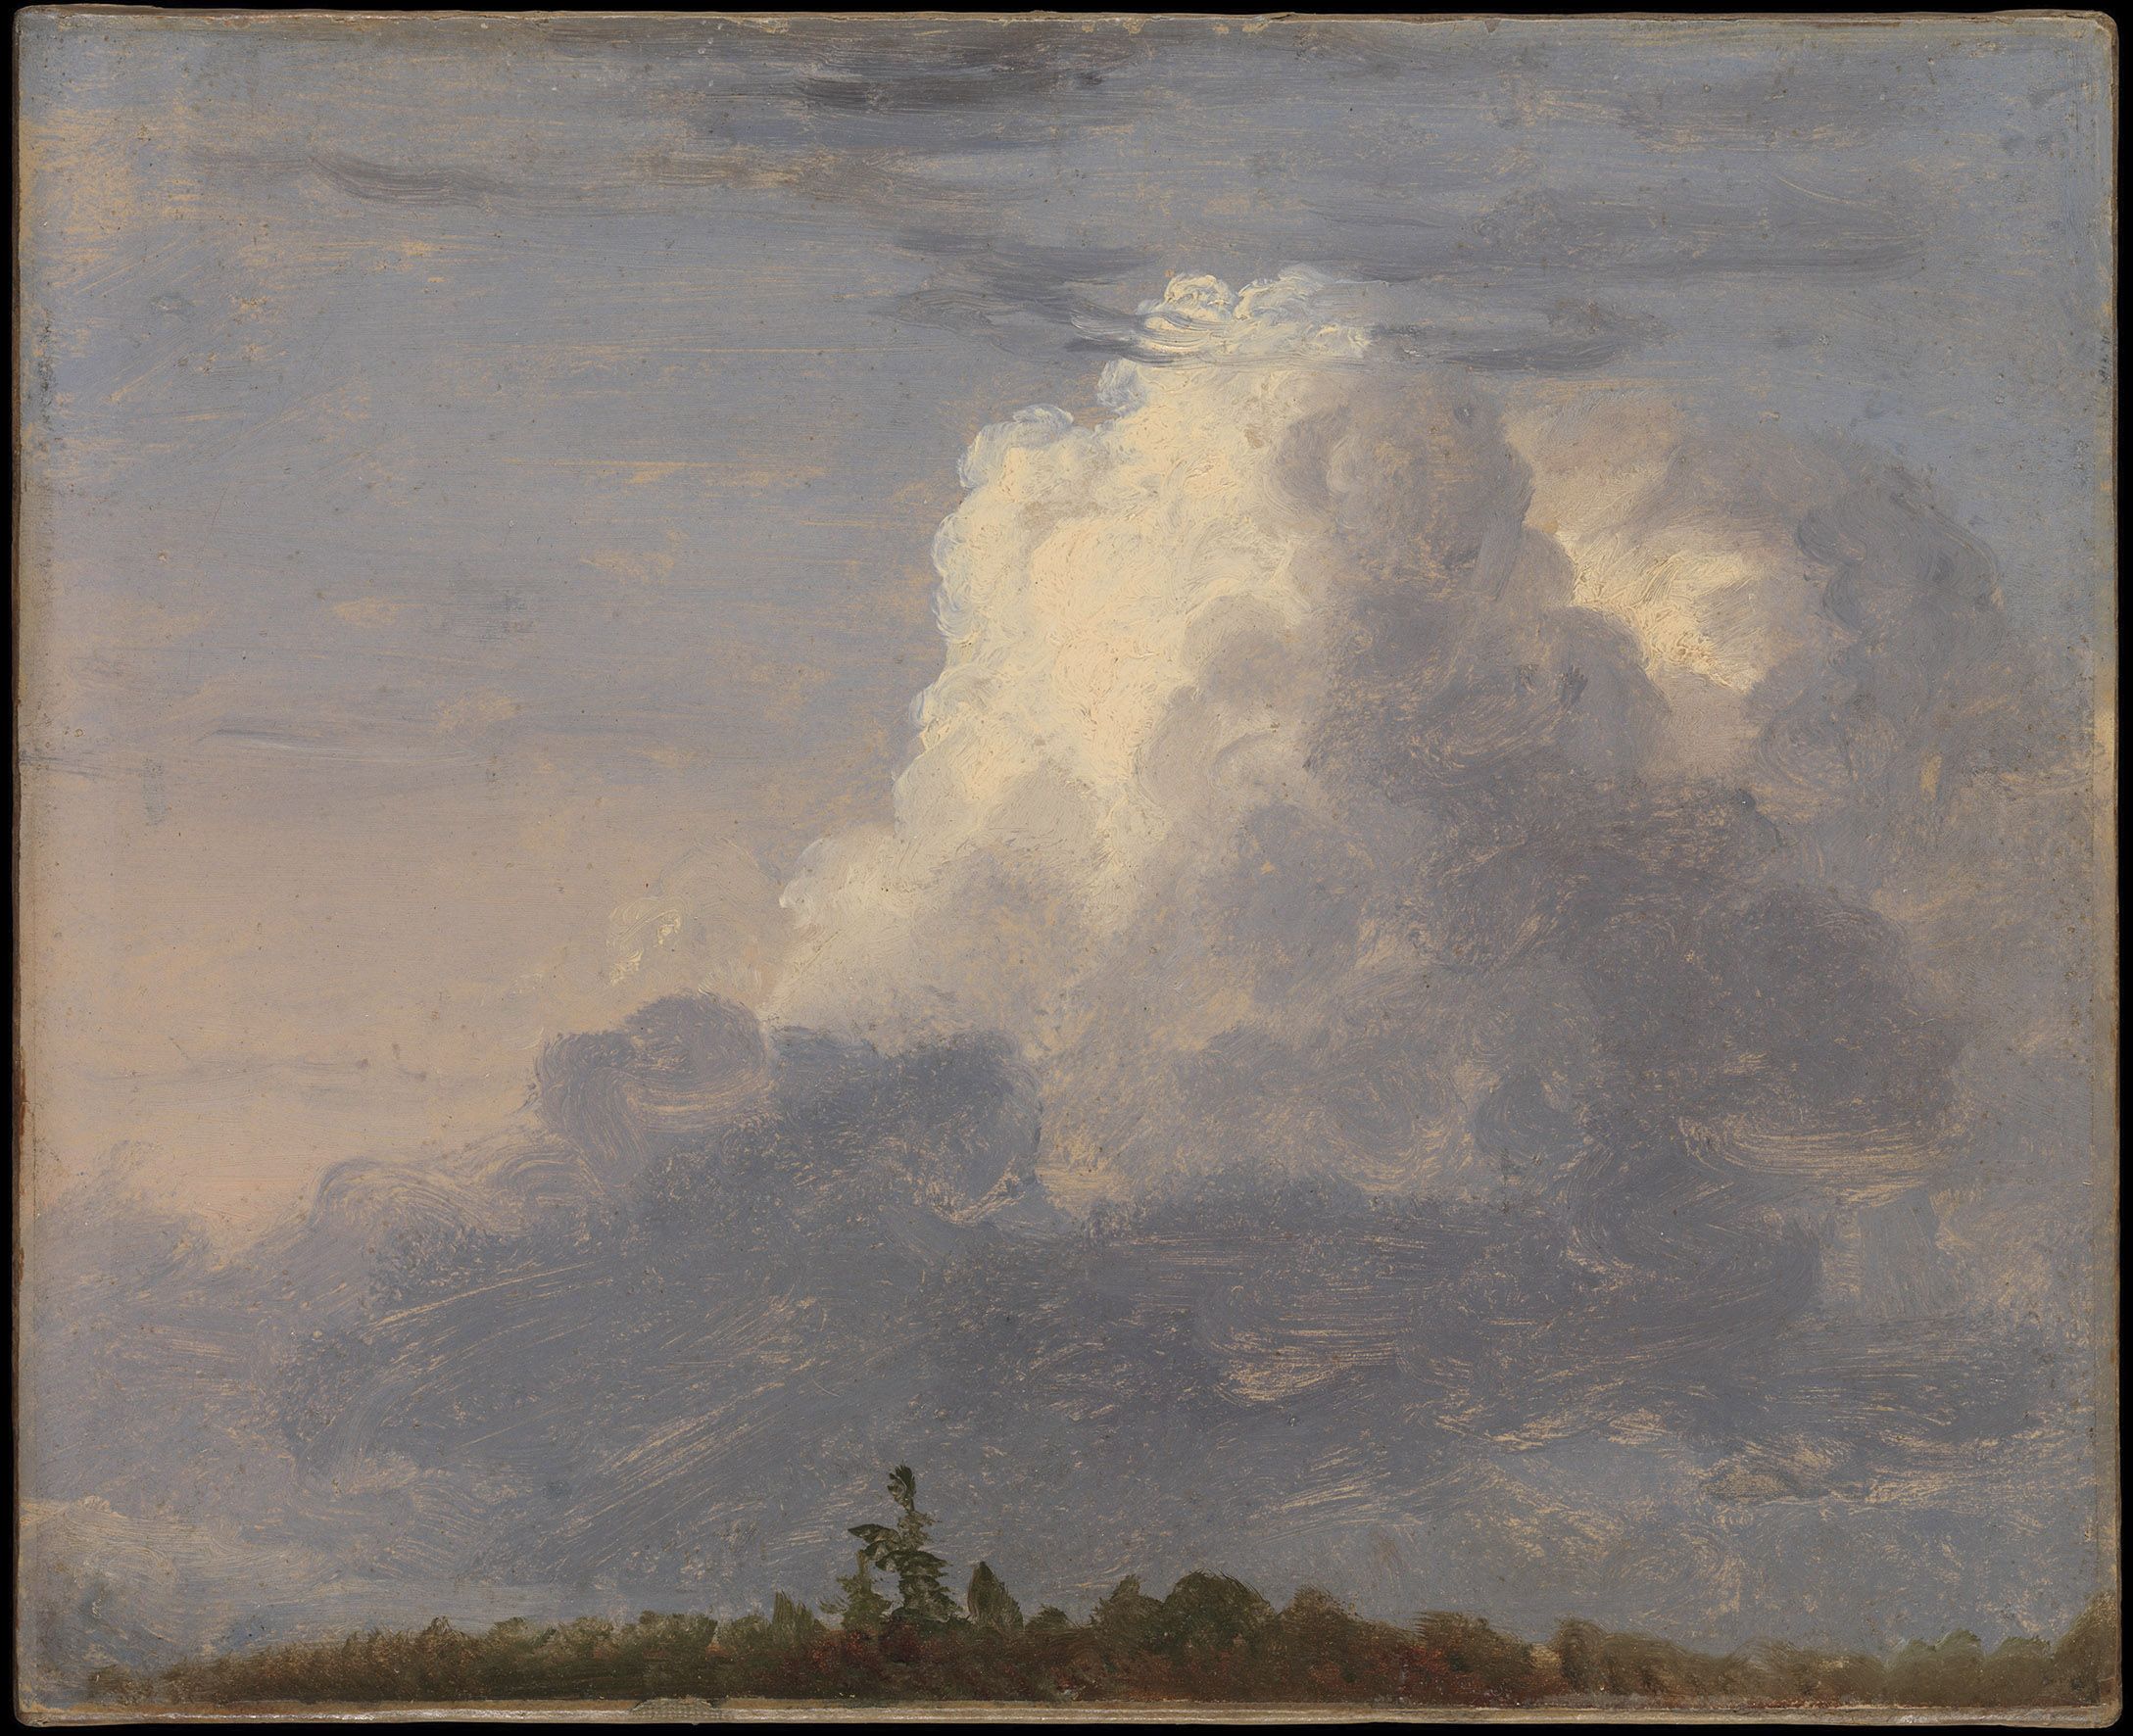 Thomas Cole Clouds, about 1838 Oil on paper laid down on canvas 22.2 x 27.6 cm The Metropolitan Museum of Art, New York, Morris K. Jesup Fund, 2013 (2013.201) © The Metropolitan Museum of Art, New York